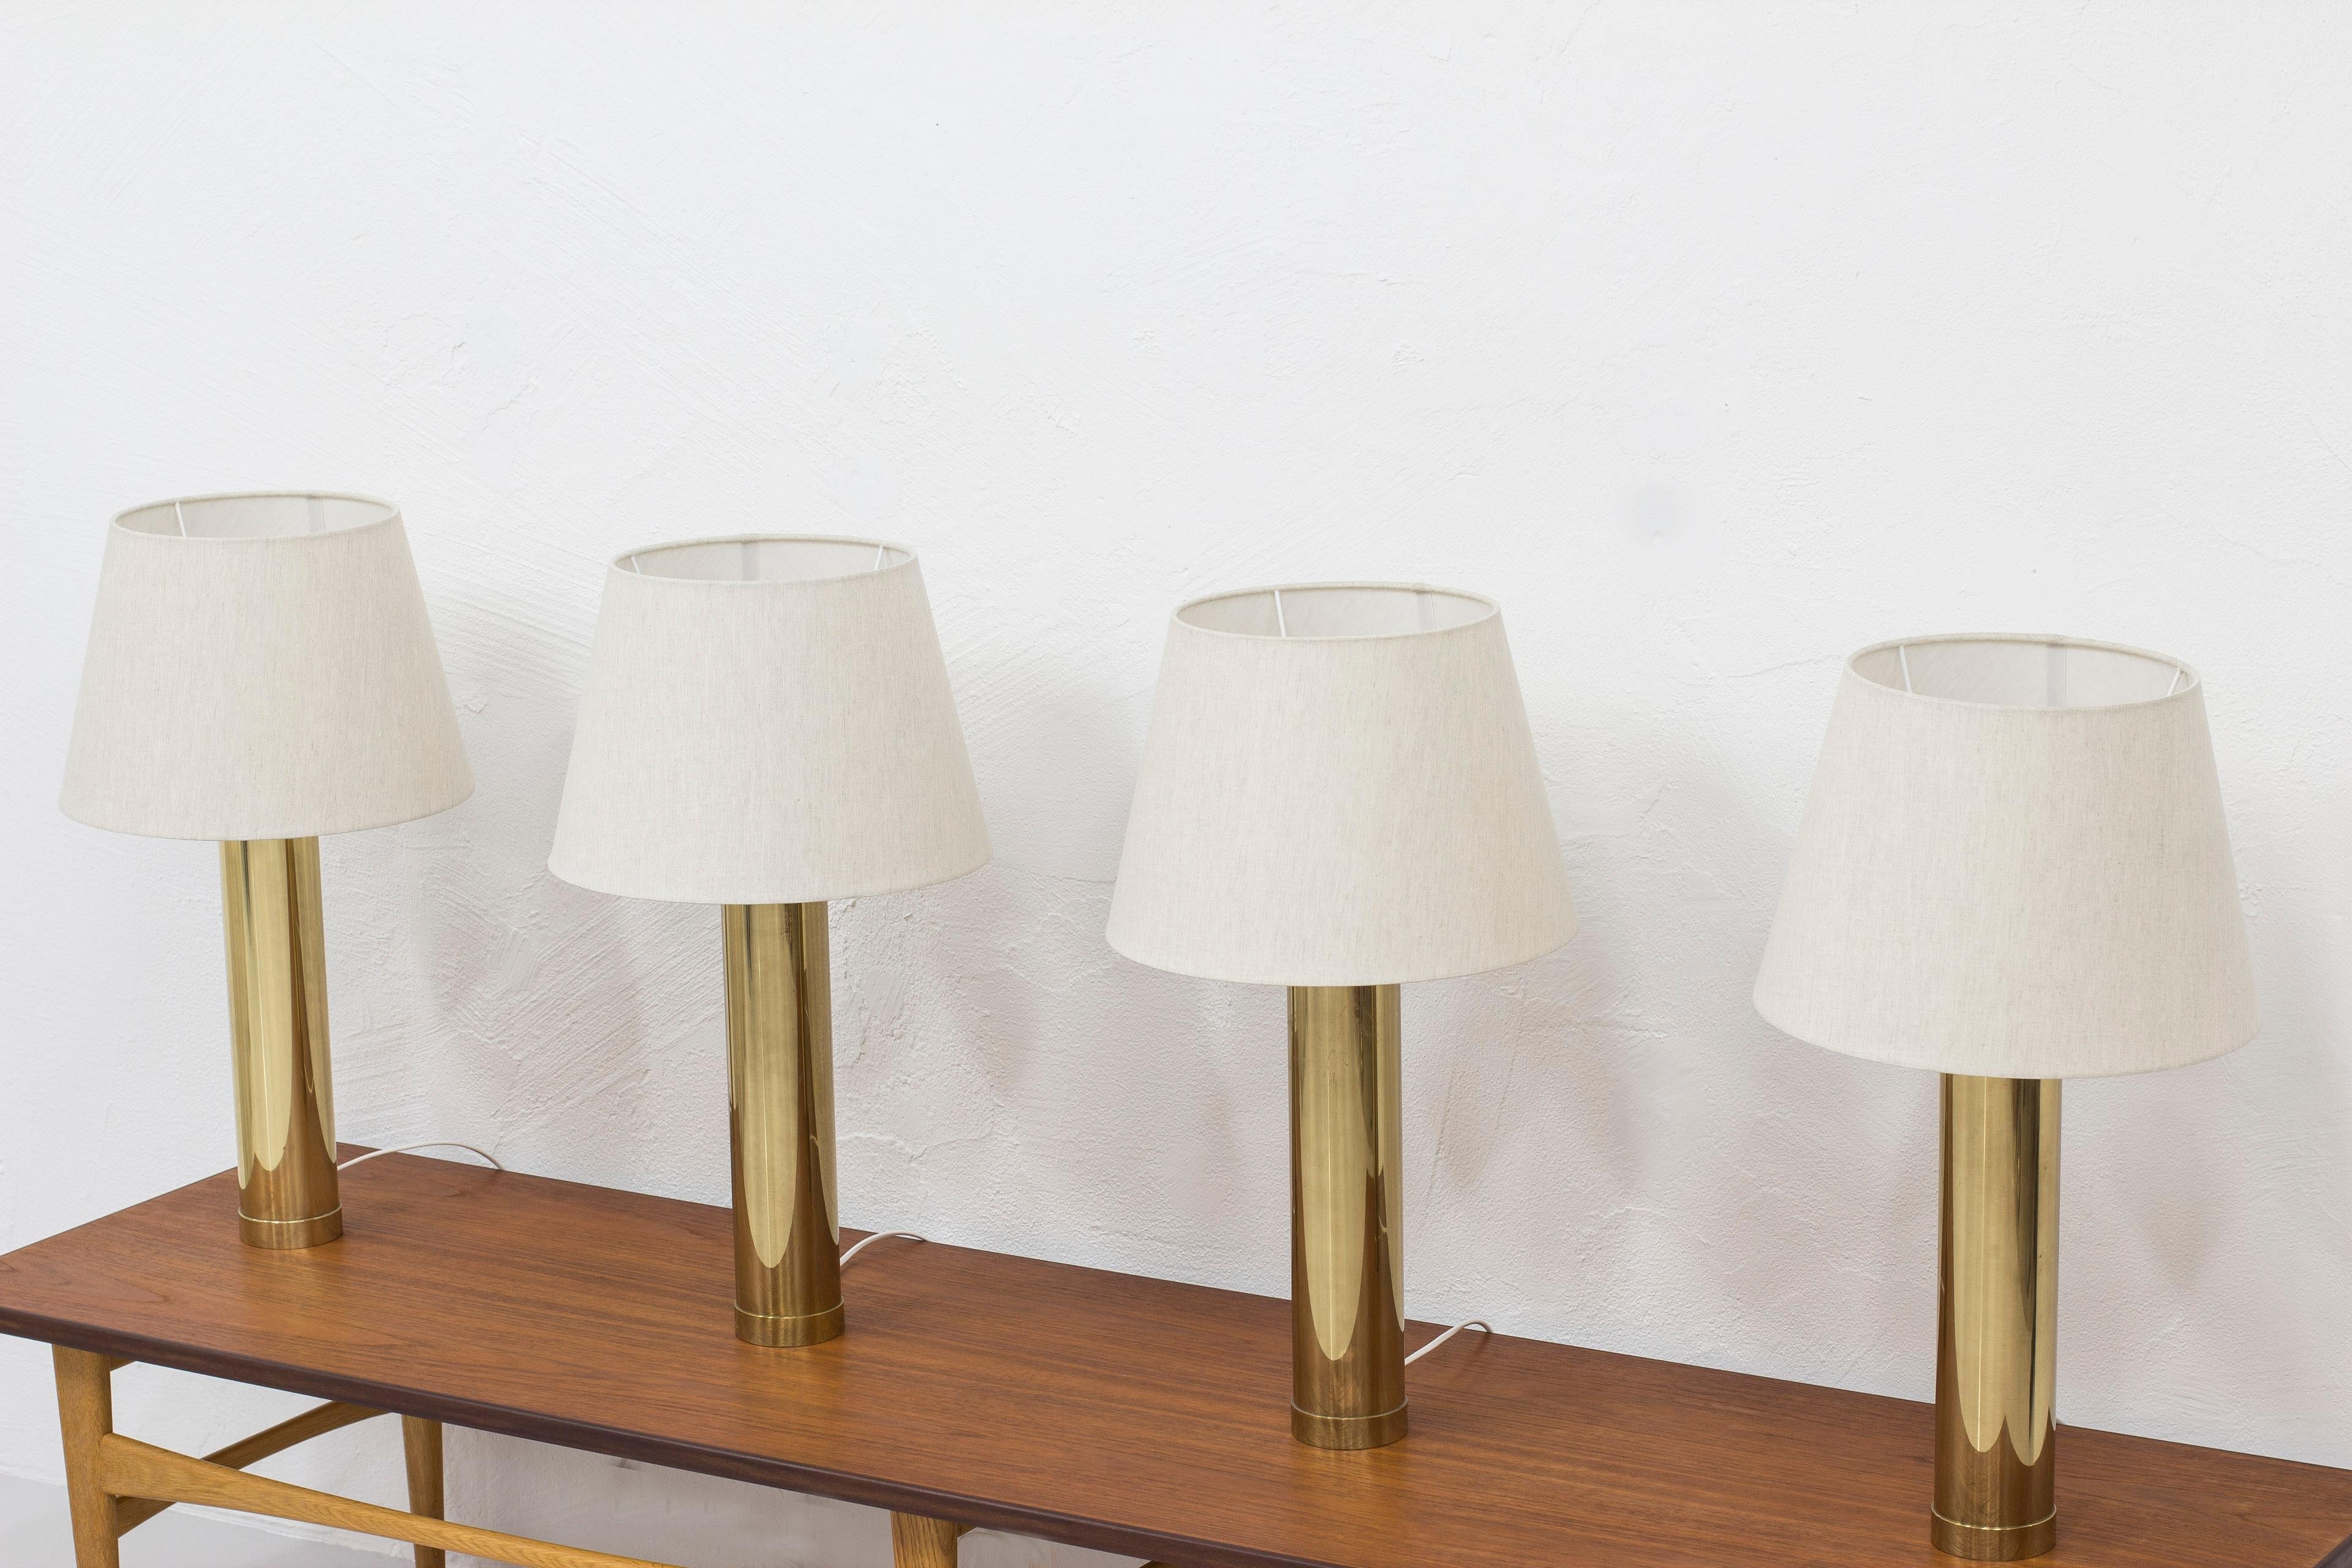 Pair of Brass Table Lamps by Bergboms, Sweden, 1960s, 4 Pcs Total For Sale 5